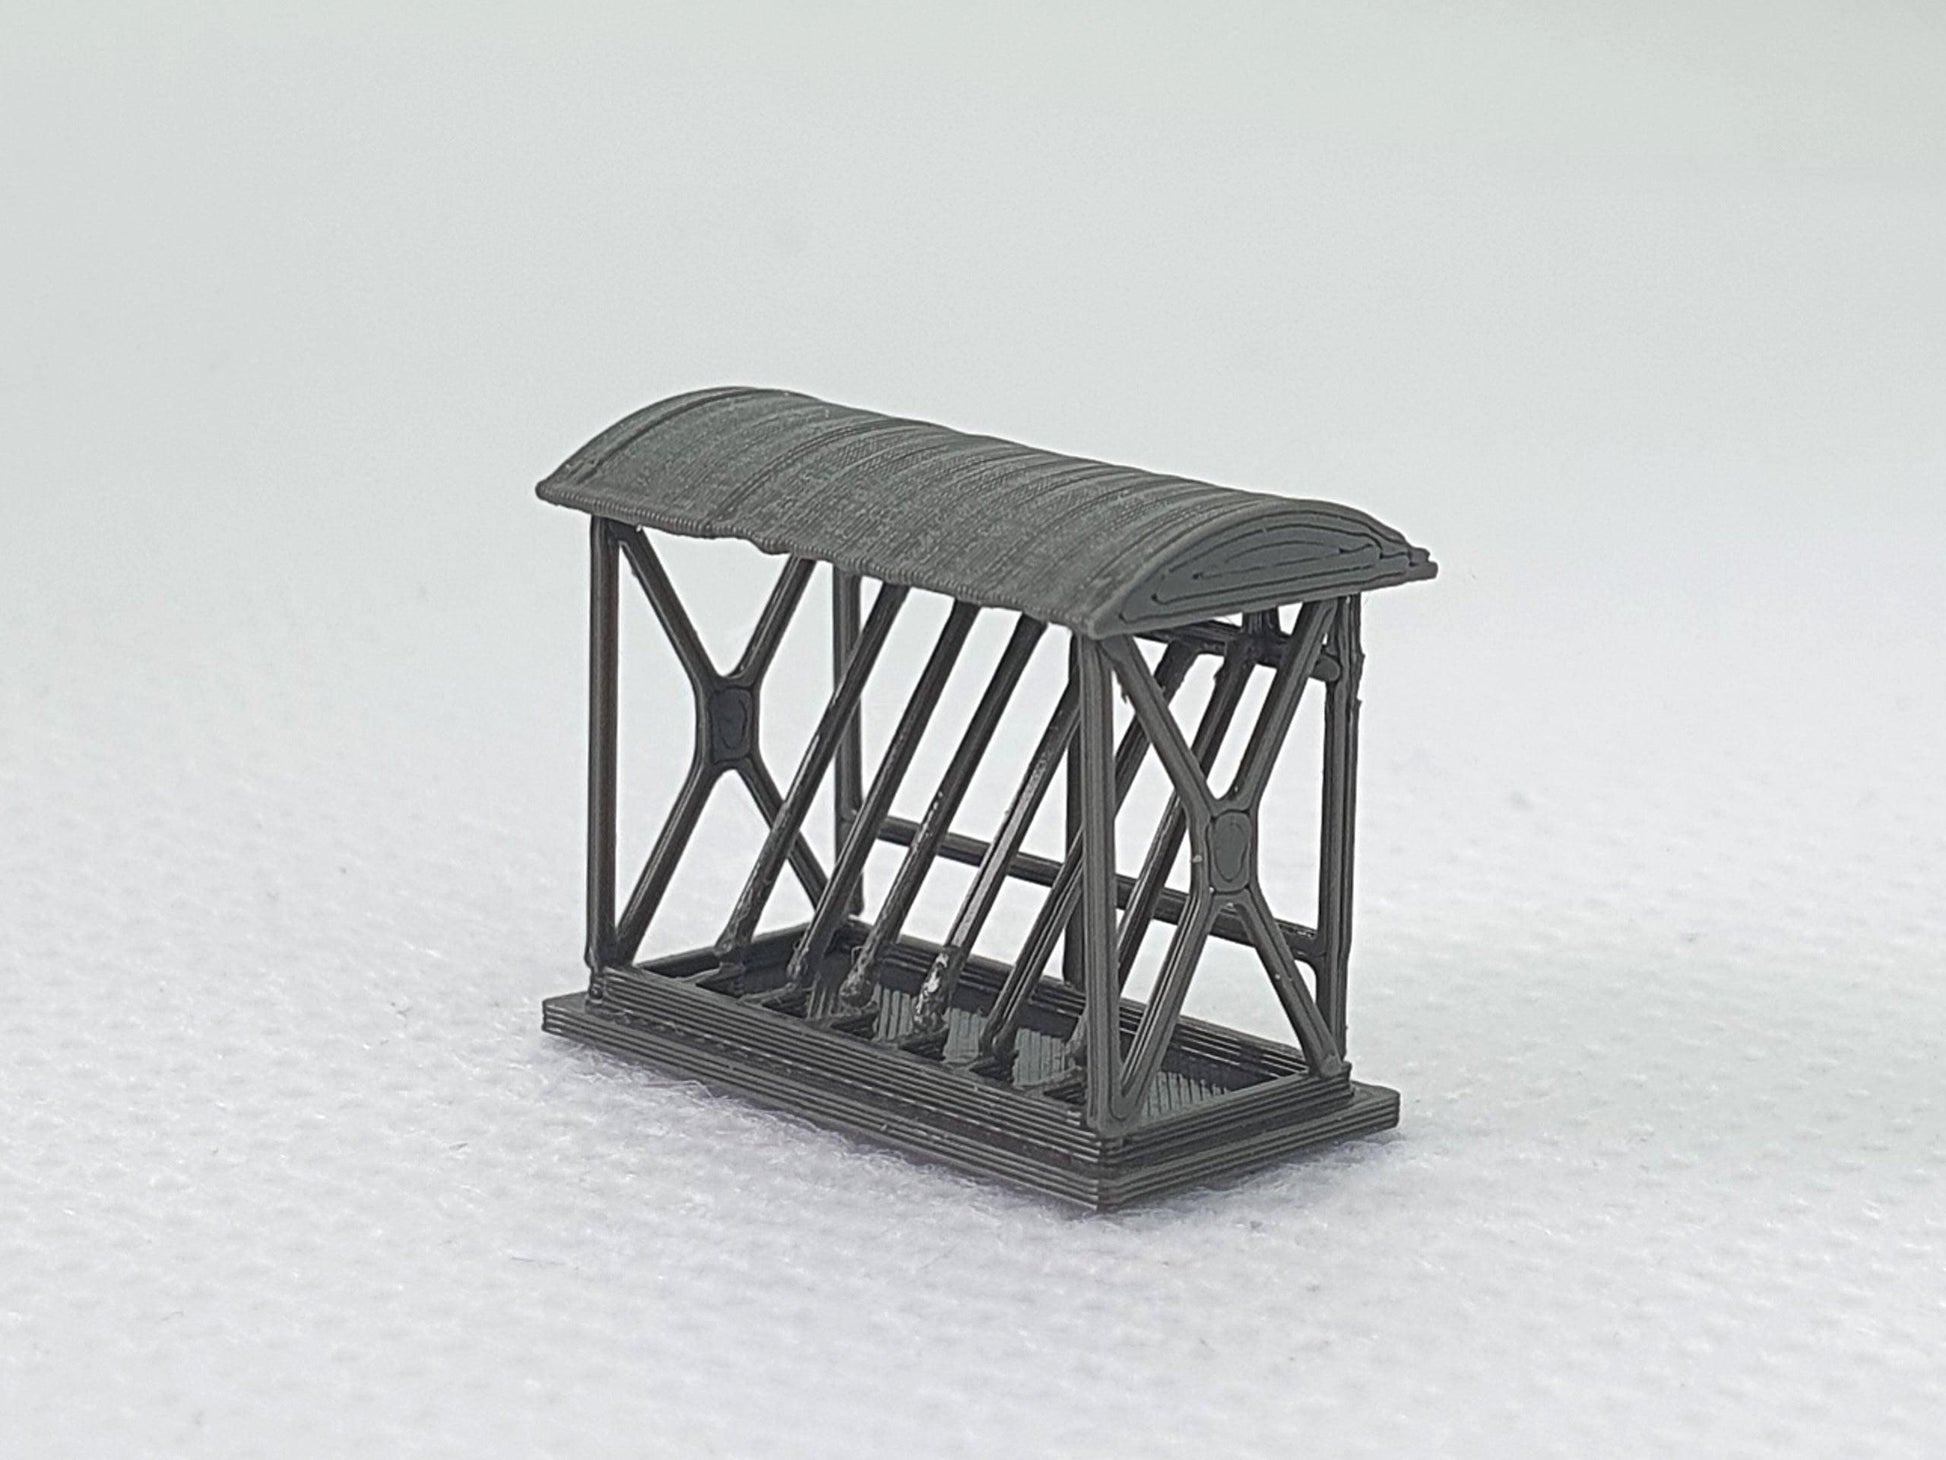 N gauge scale model of a bike shelter for up to 6 bicycles - Three Peaks Models